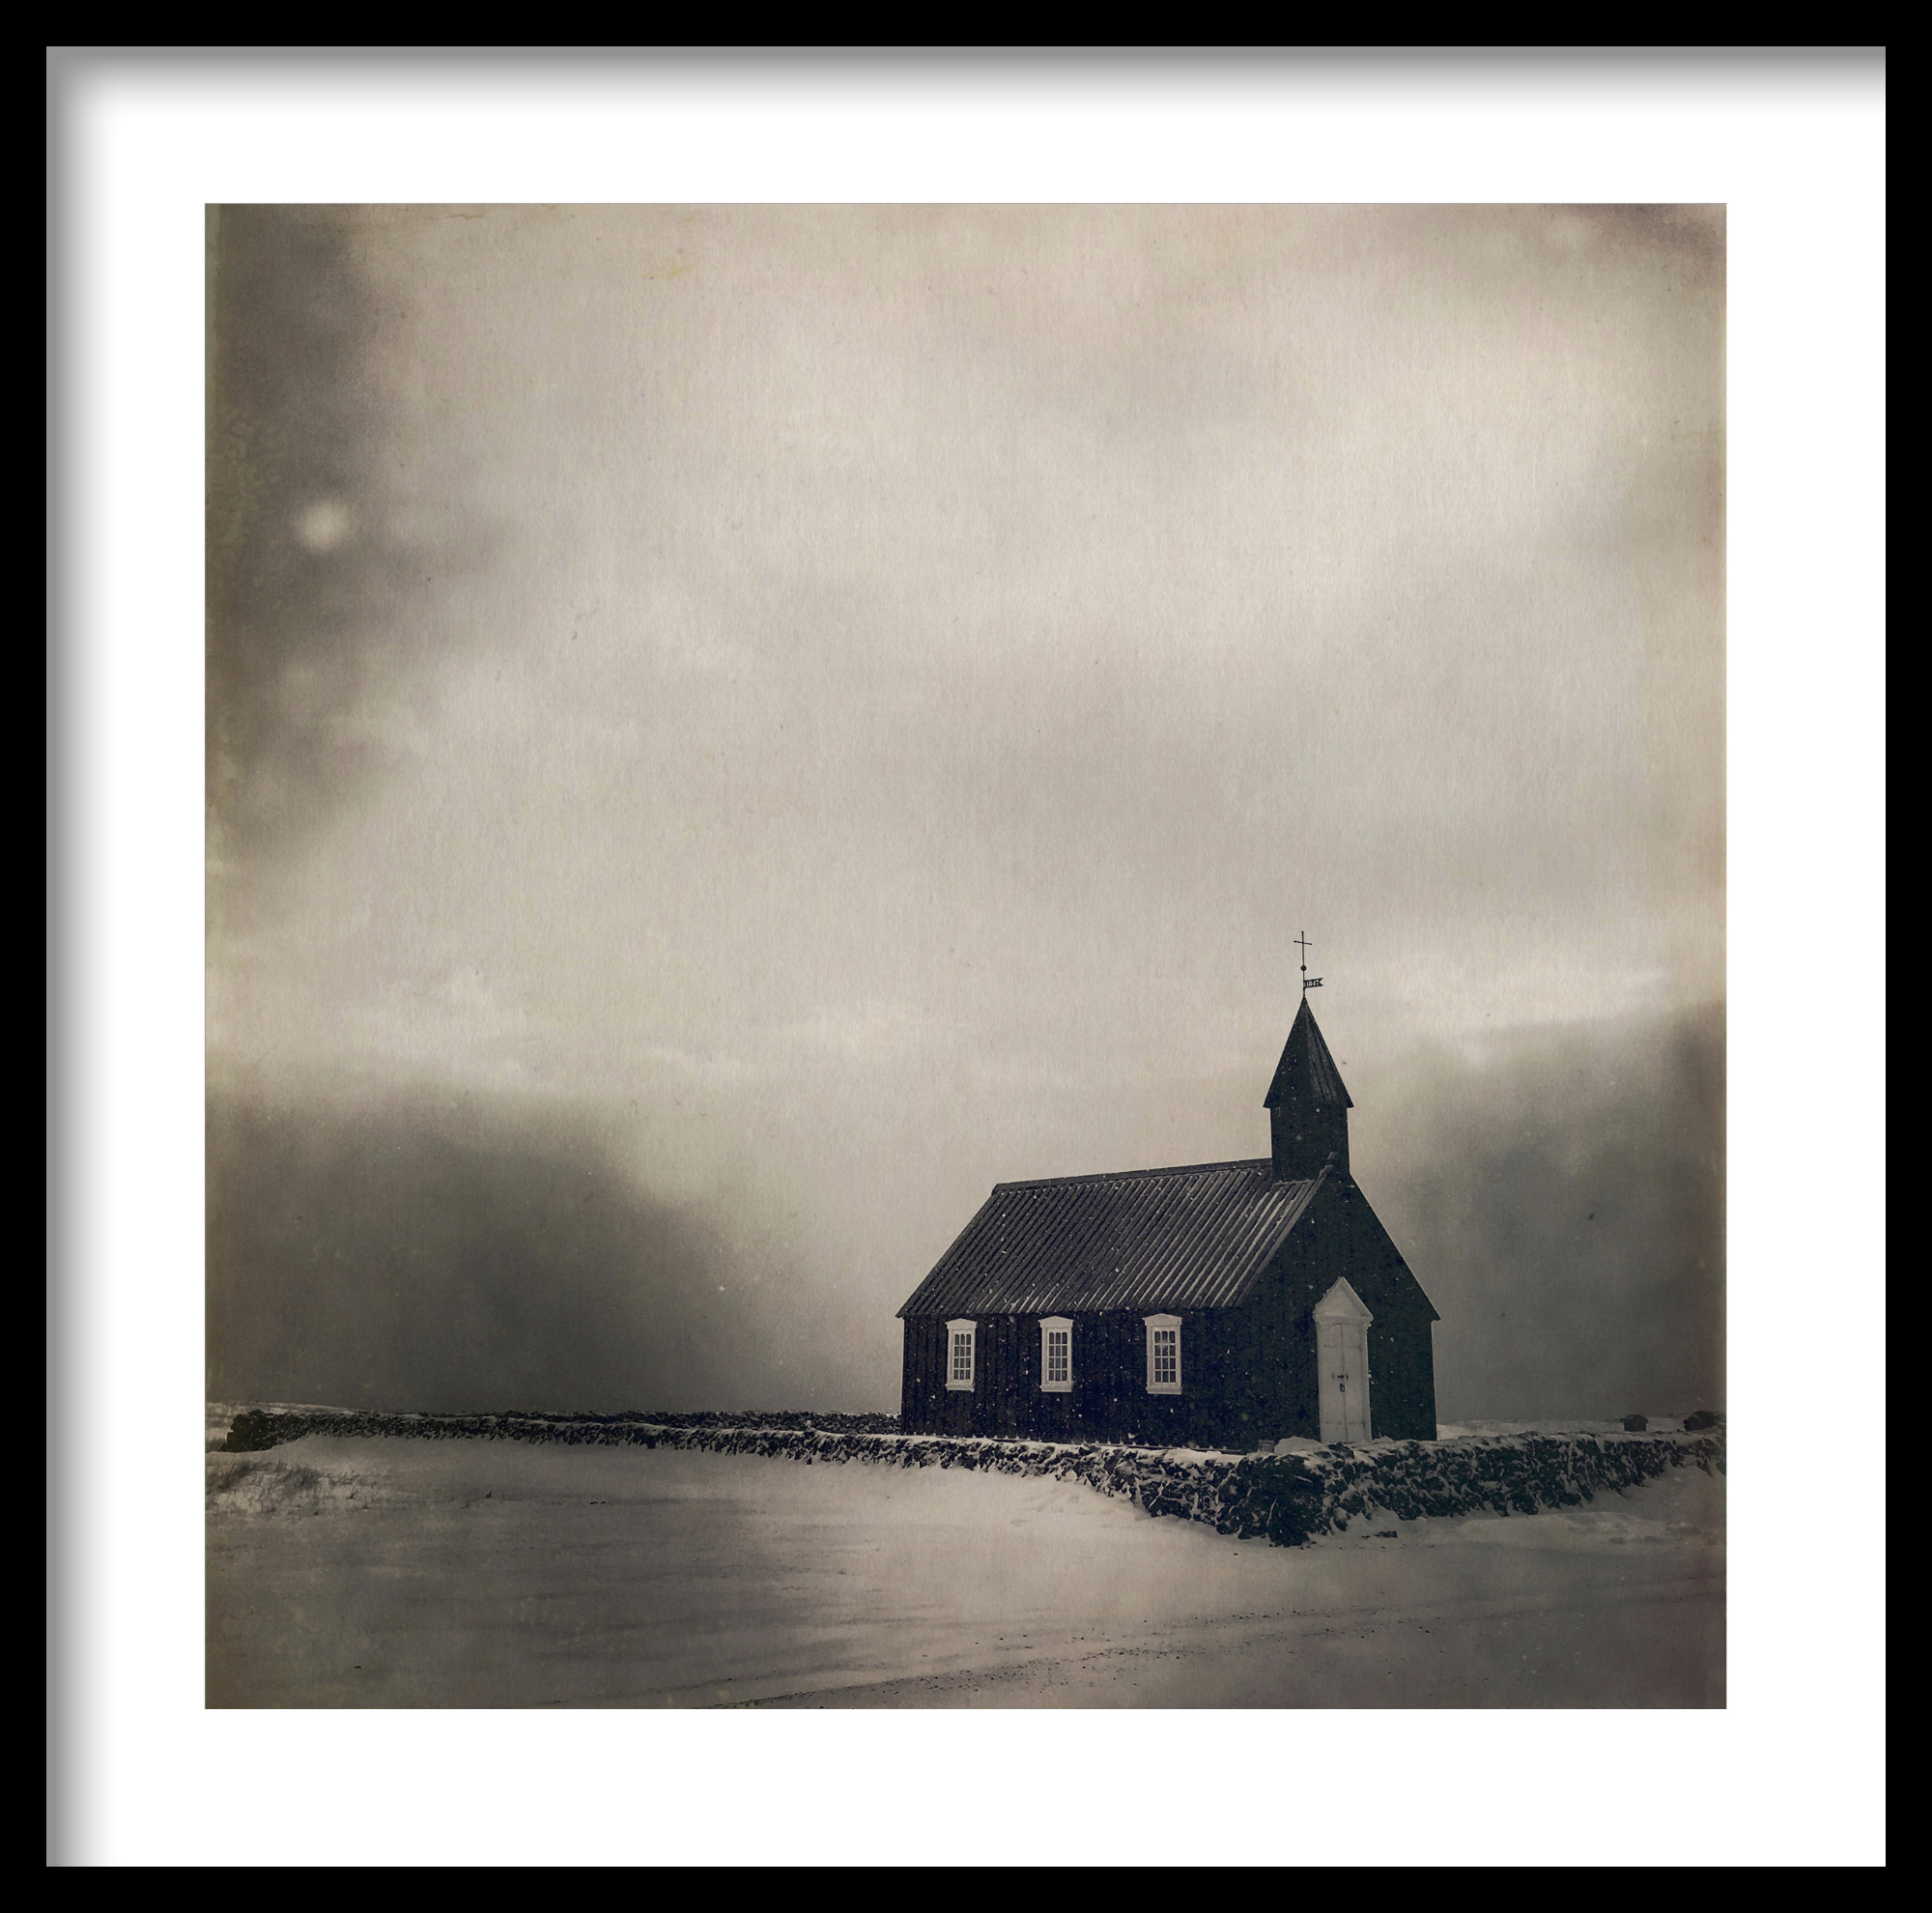 The Black Church in Iceland